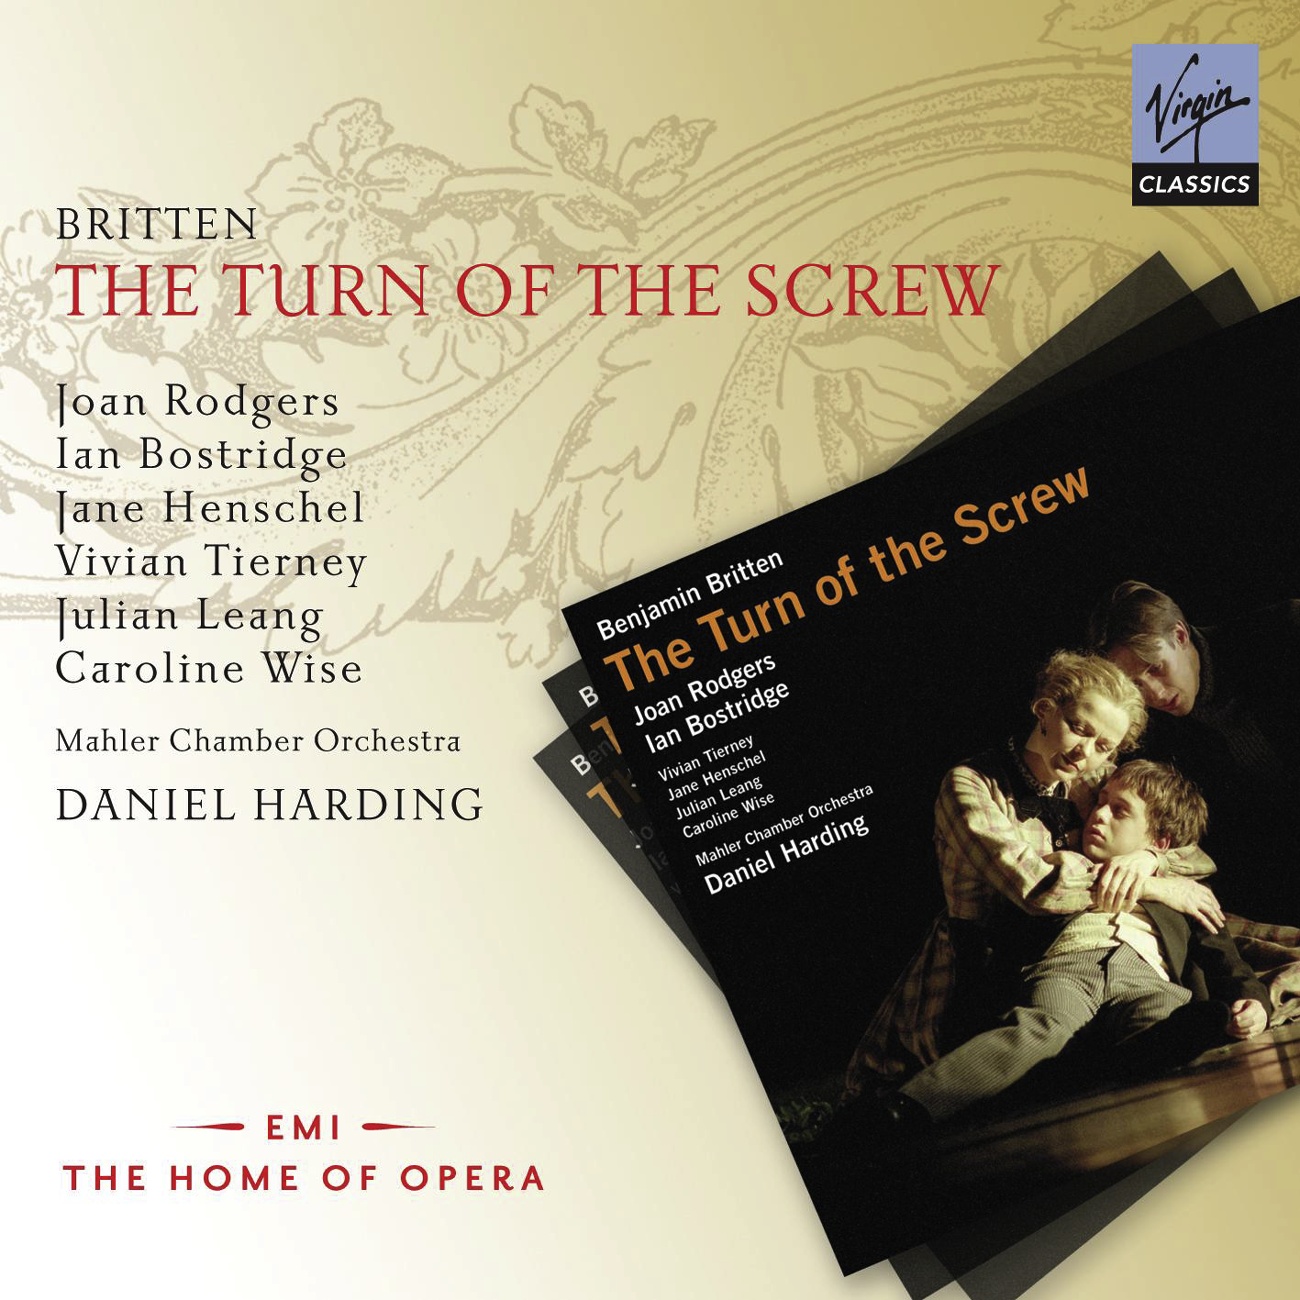 The Turn of the Screw Op. 54, ACT TWO: Scene 4 : The Bedroom (Governess/Miles/Quint)